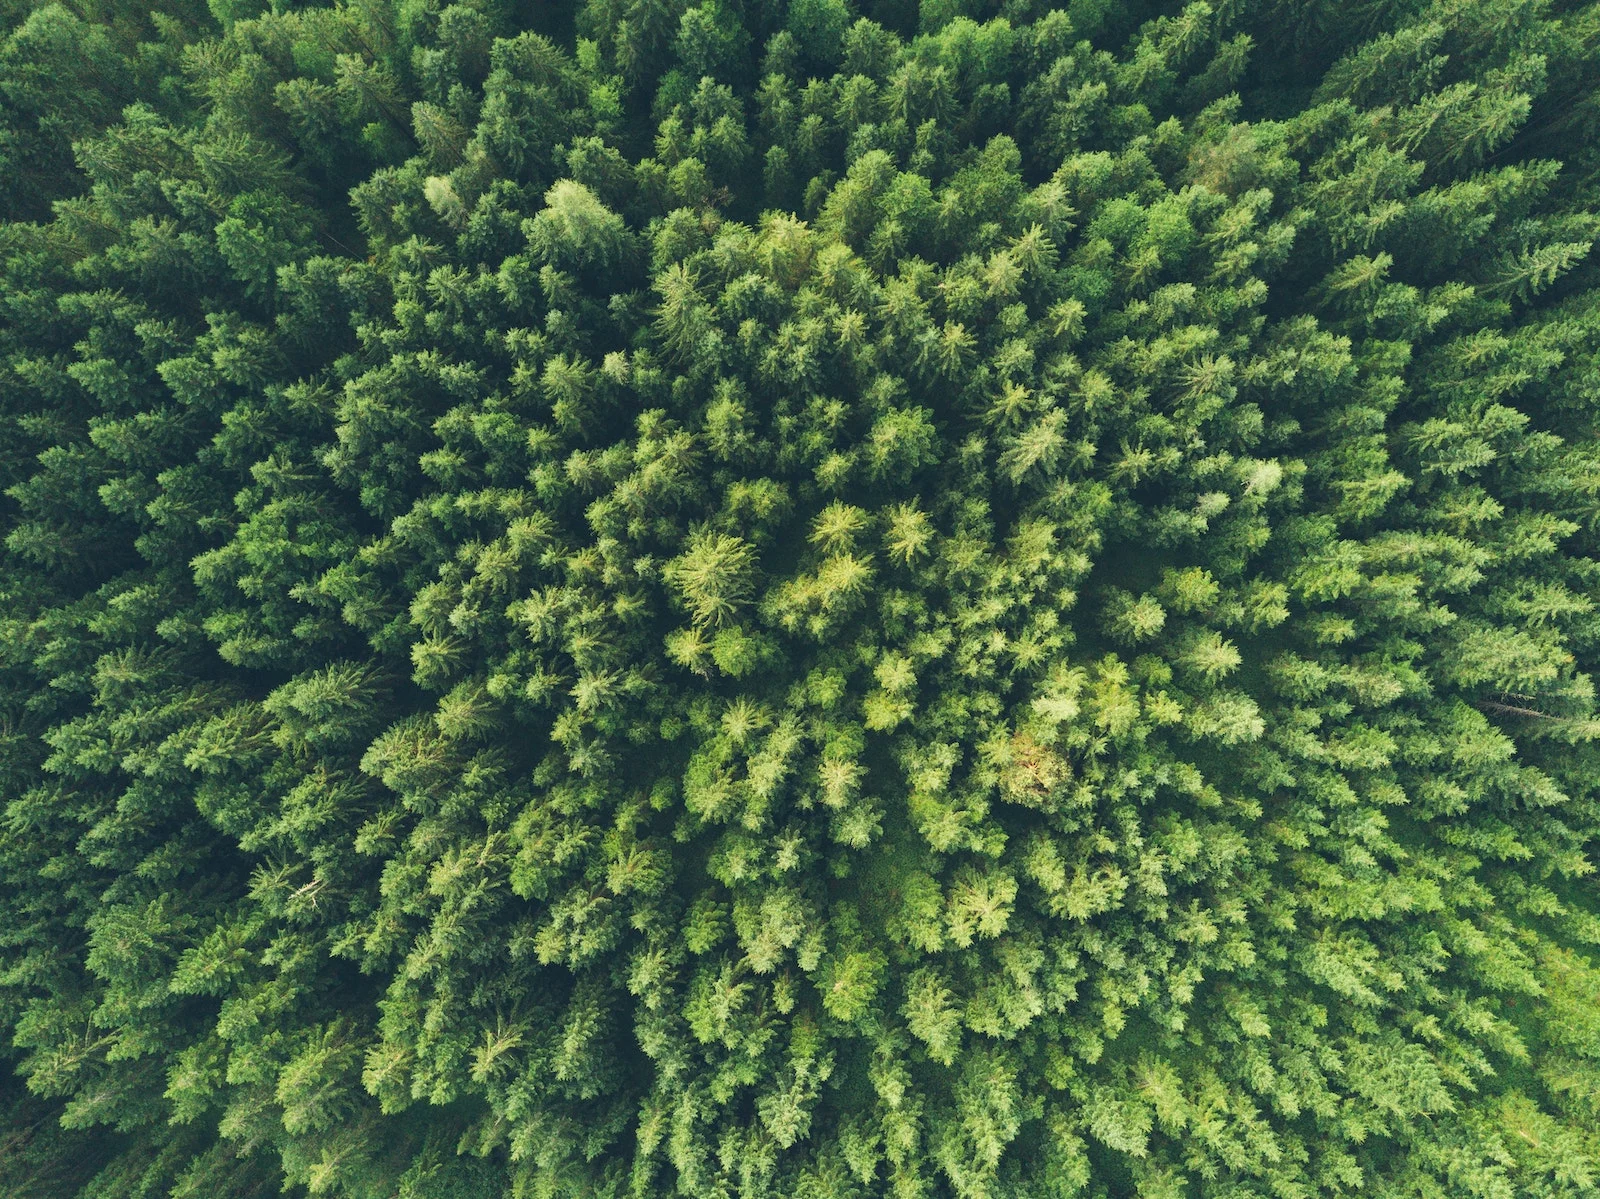 Forest from top perspective